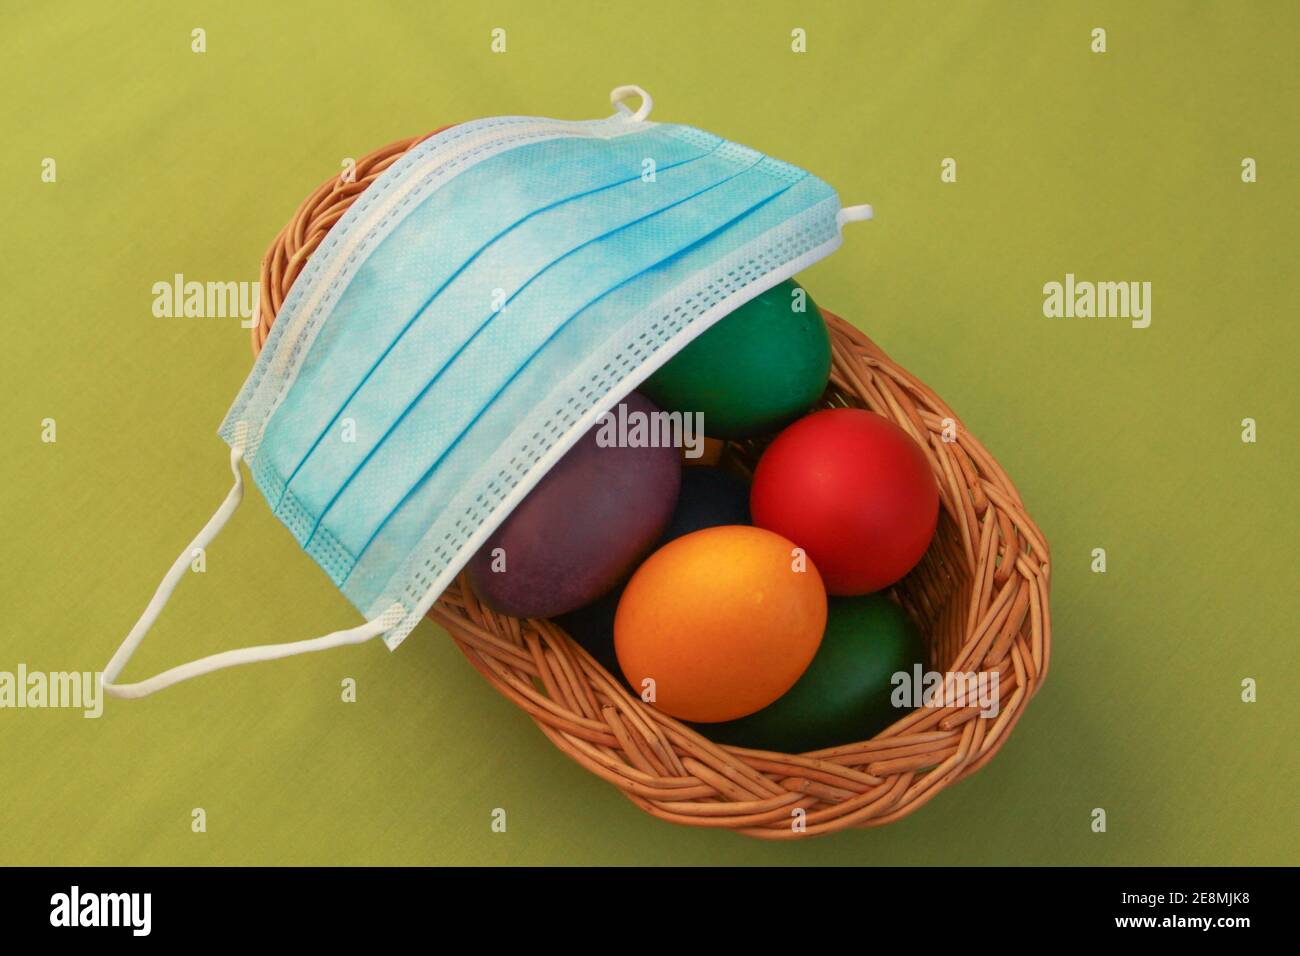 Isolated colored painted Easter eggs in wooden basket decoration with surgical mask, a symbol of coronavirus pandemic. Easter 2020 covid 19 outbreak c Stock Photo